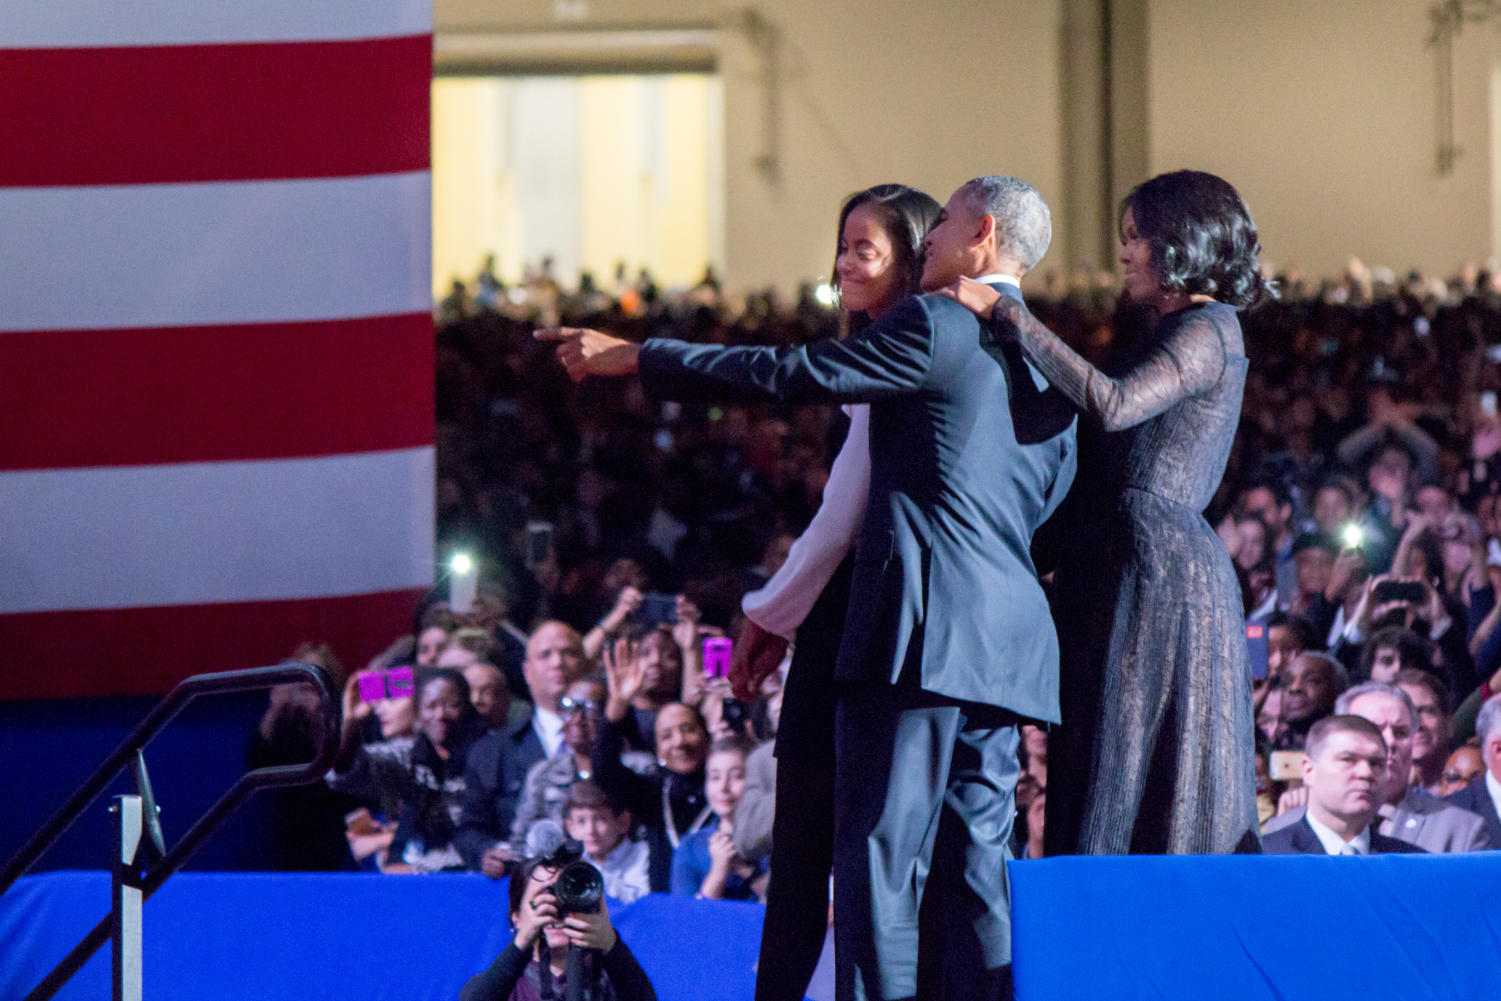 Obama points out something in the crowd to his daughter Malia Obama.